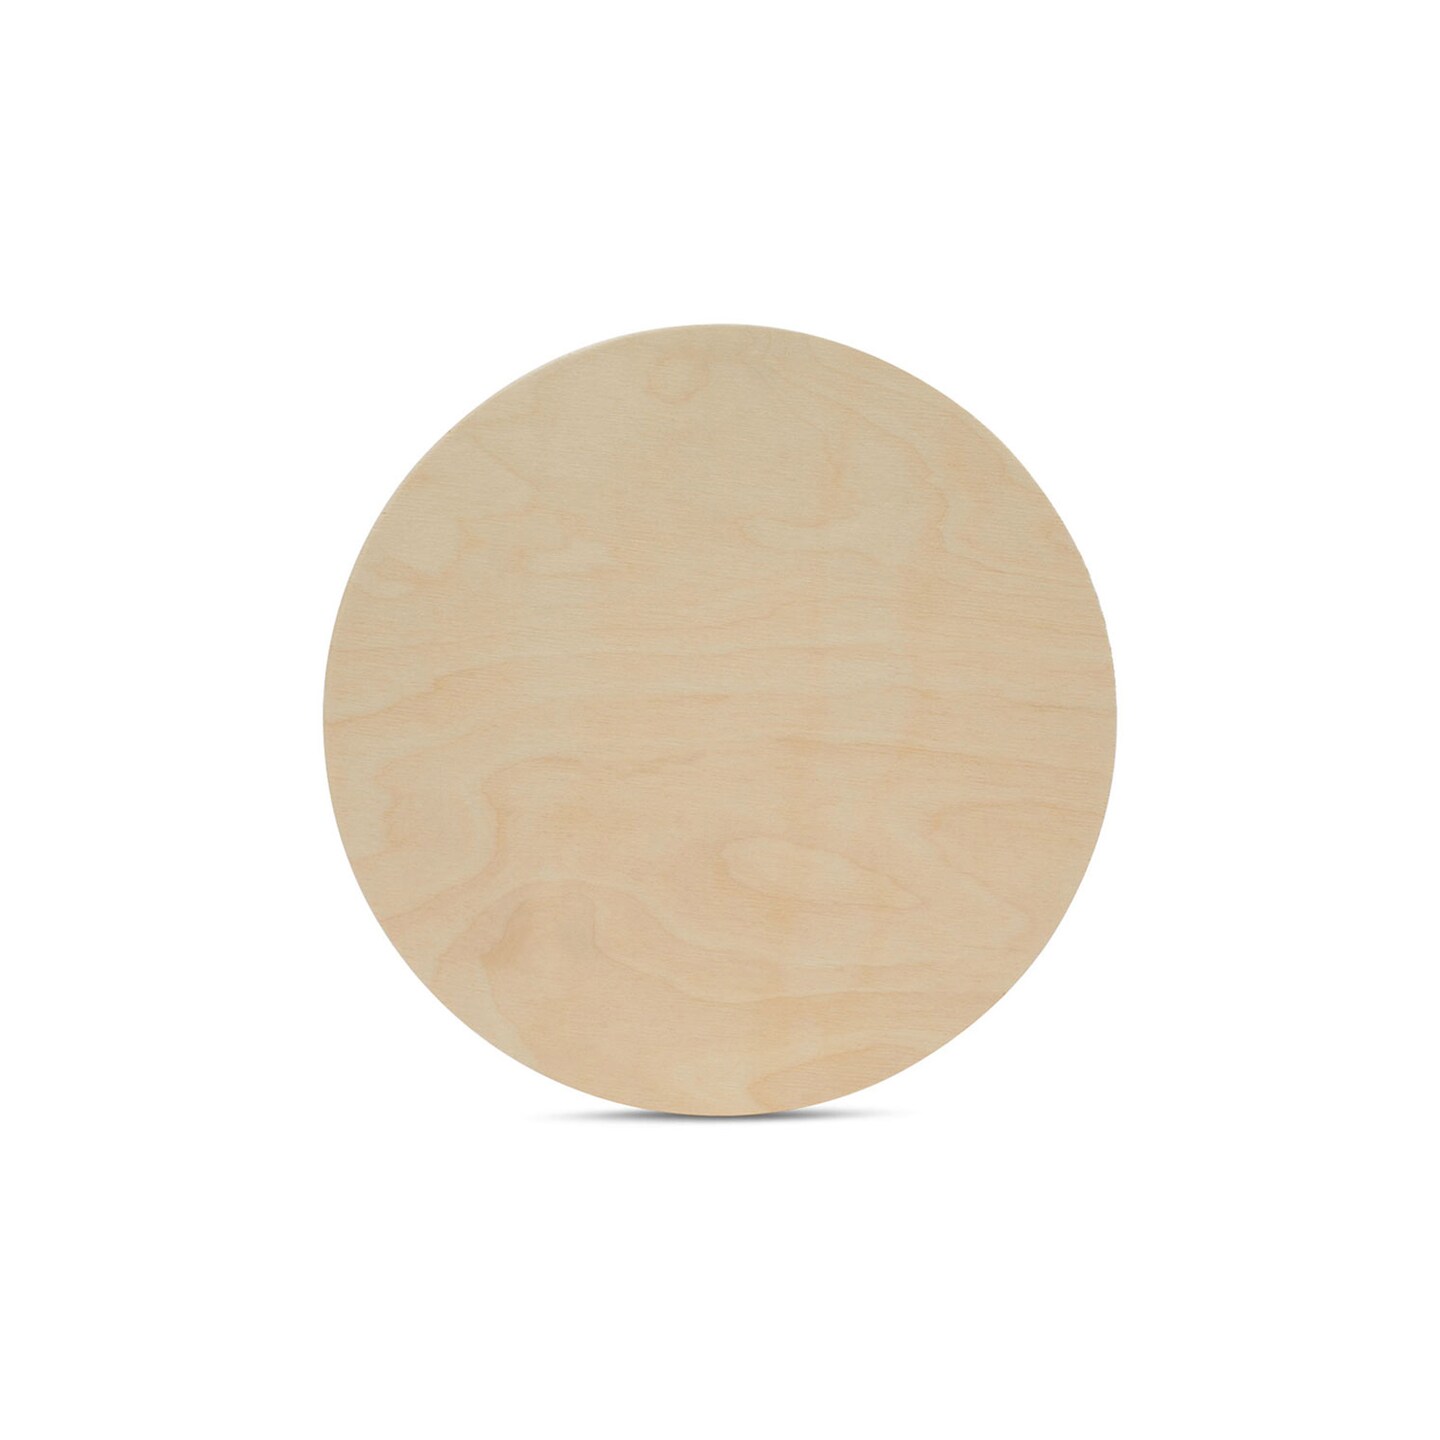 Baltic Birch Plywood Circles, Plywood Rounds, 12 Inch Wood Rounds, Pack of  Circles, Door Hanger Blanks, Blank Circles 